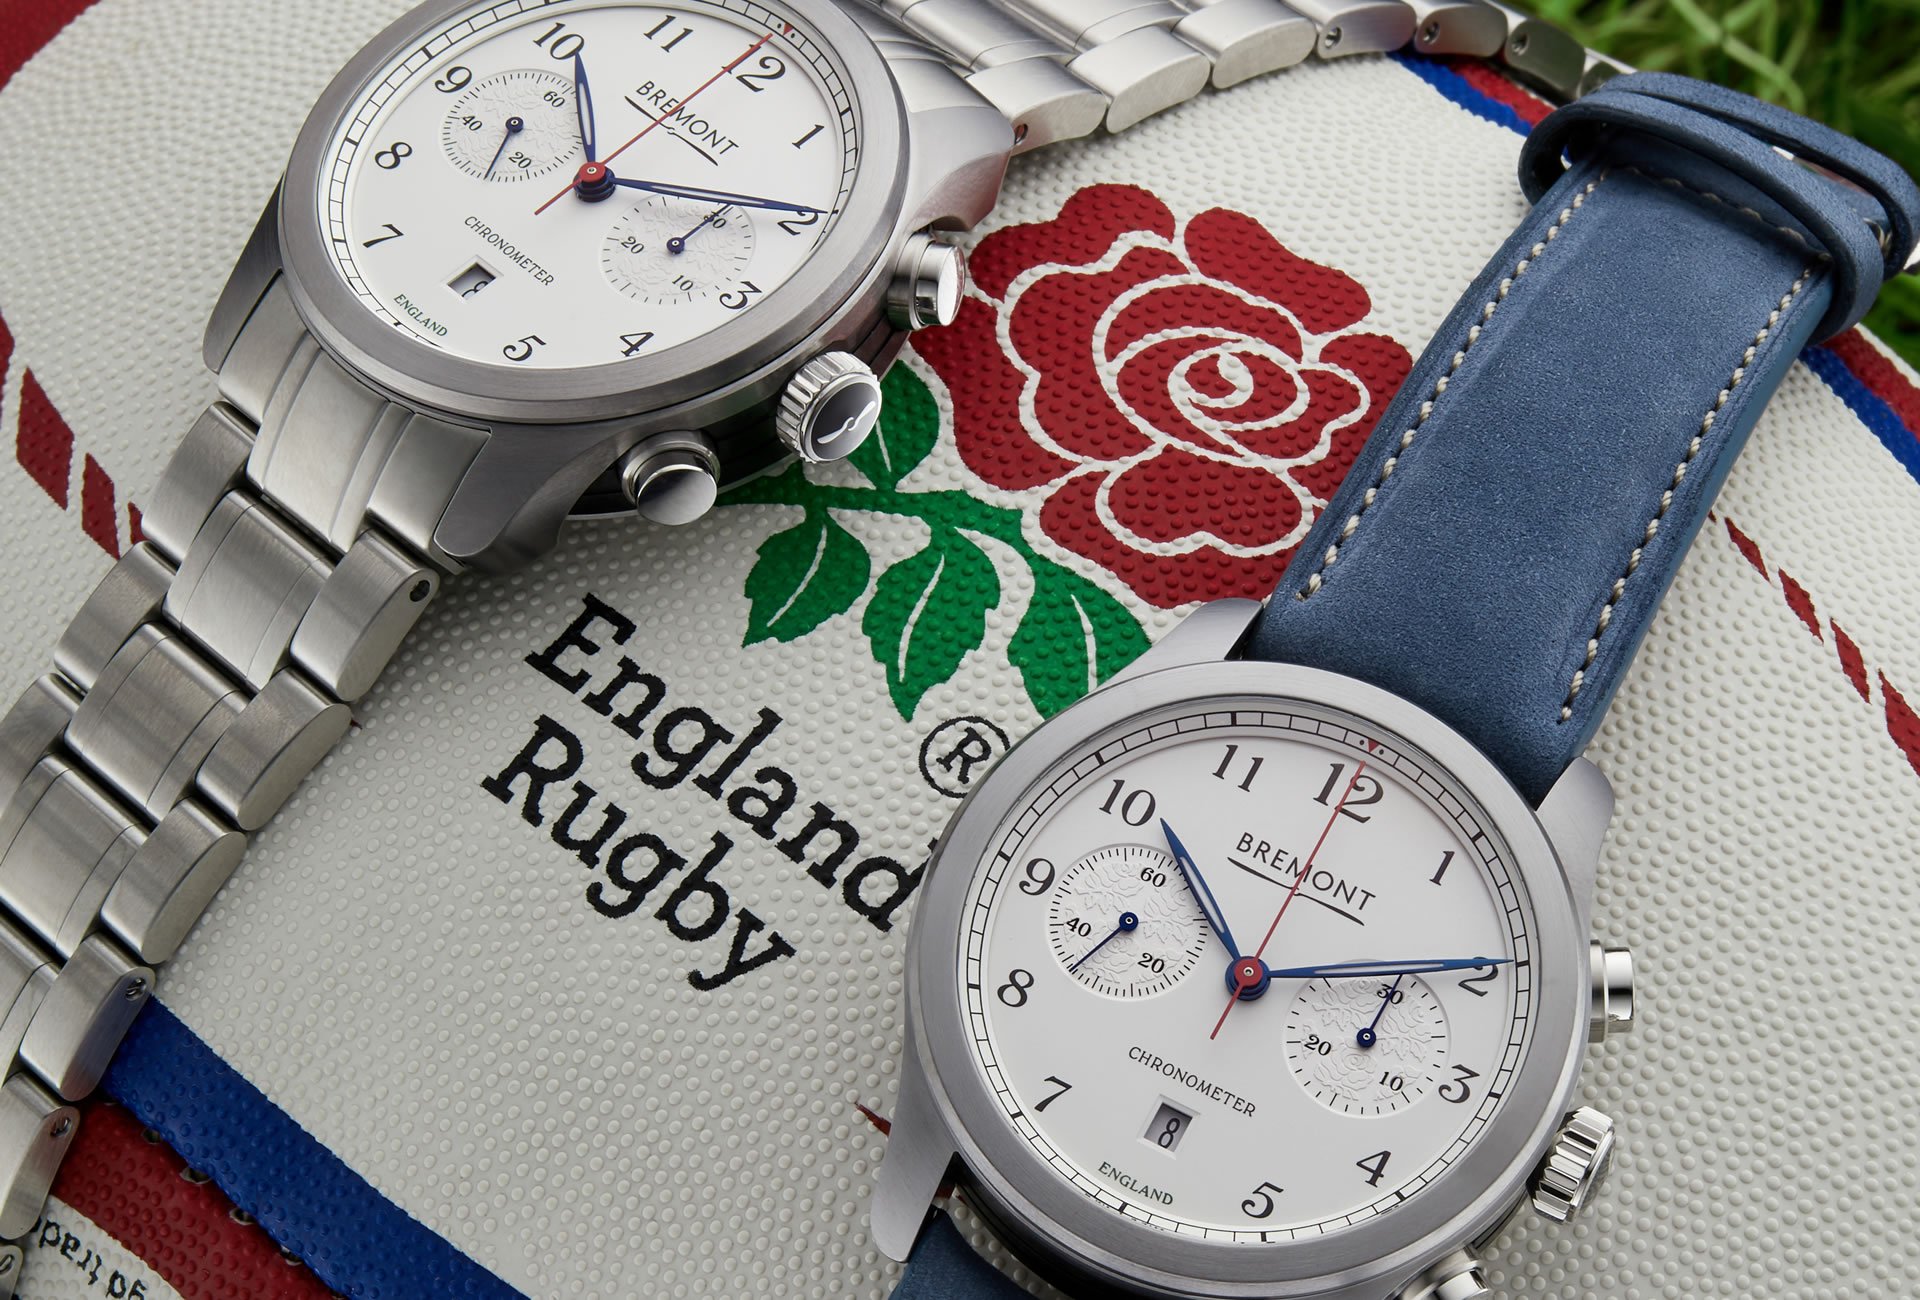 BREMONT TO BECOME OFFICIAL TIMEKEEPER OF ENGLAND RUGBY